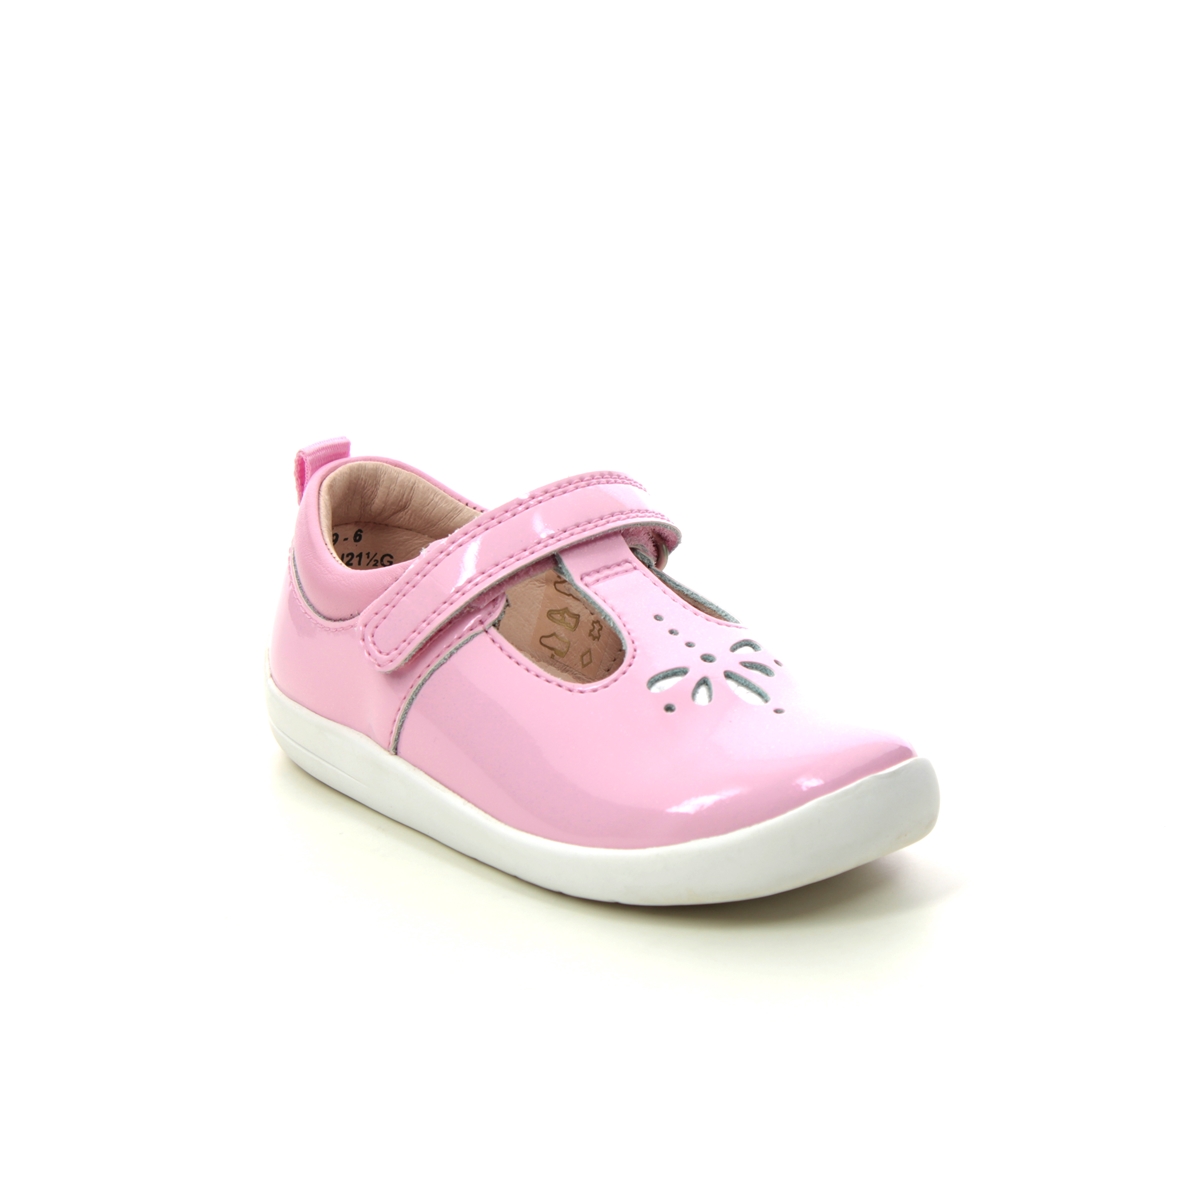 Start Rite Puzzle Pink Kids first shoes 0779-67G in a Plain Leather in Size 7